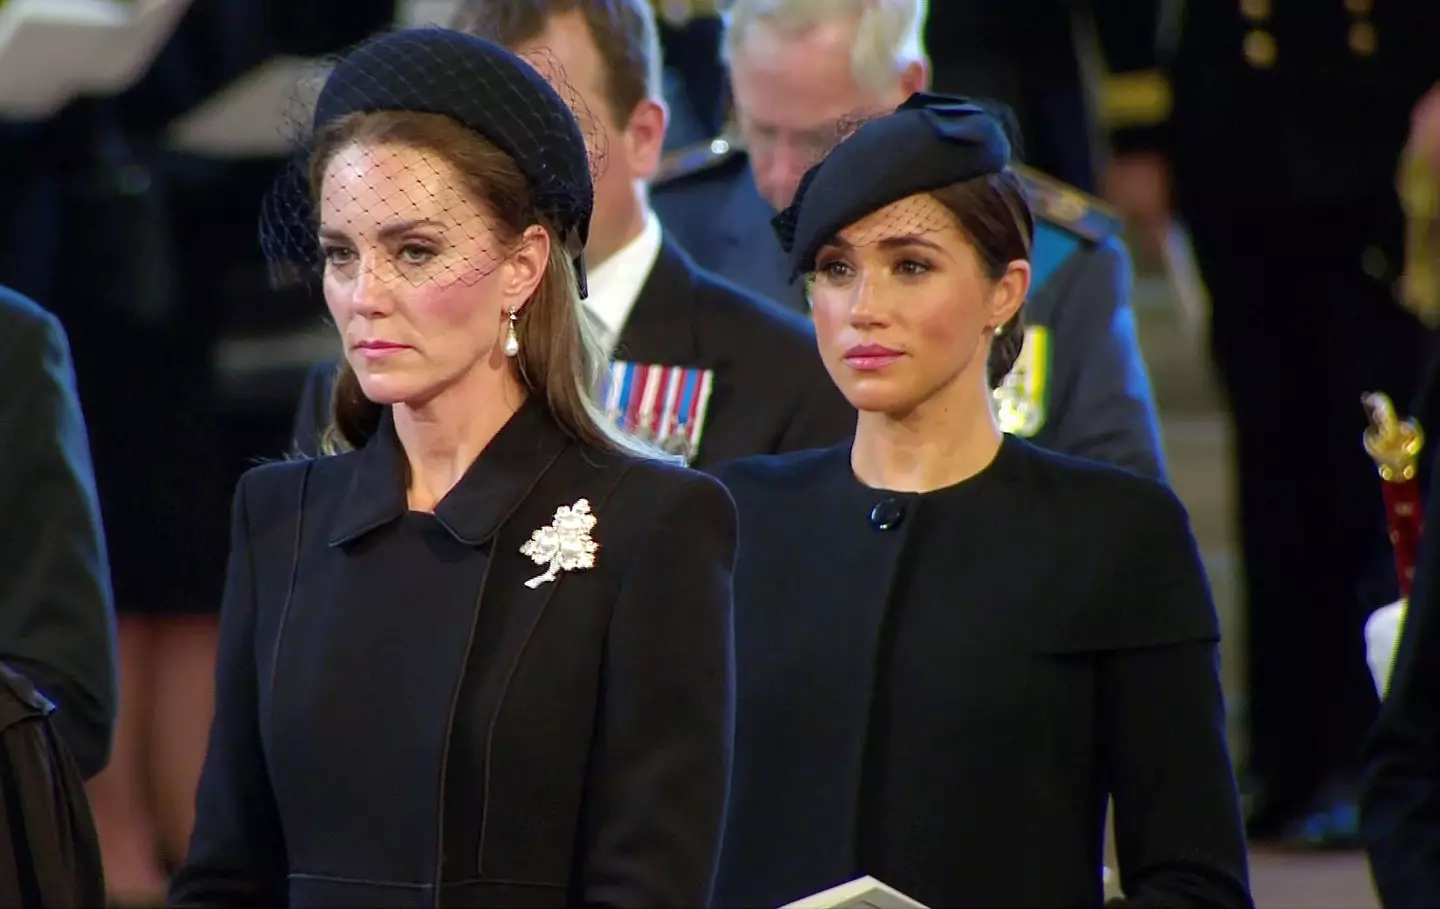 Kate Middleton also wore the Queen's earrings at her funeral.